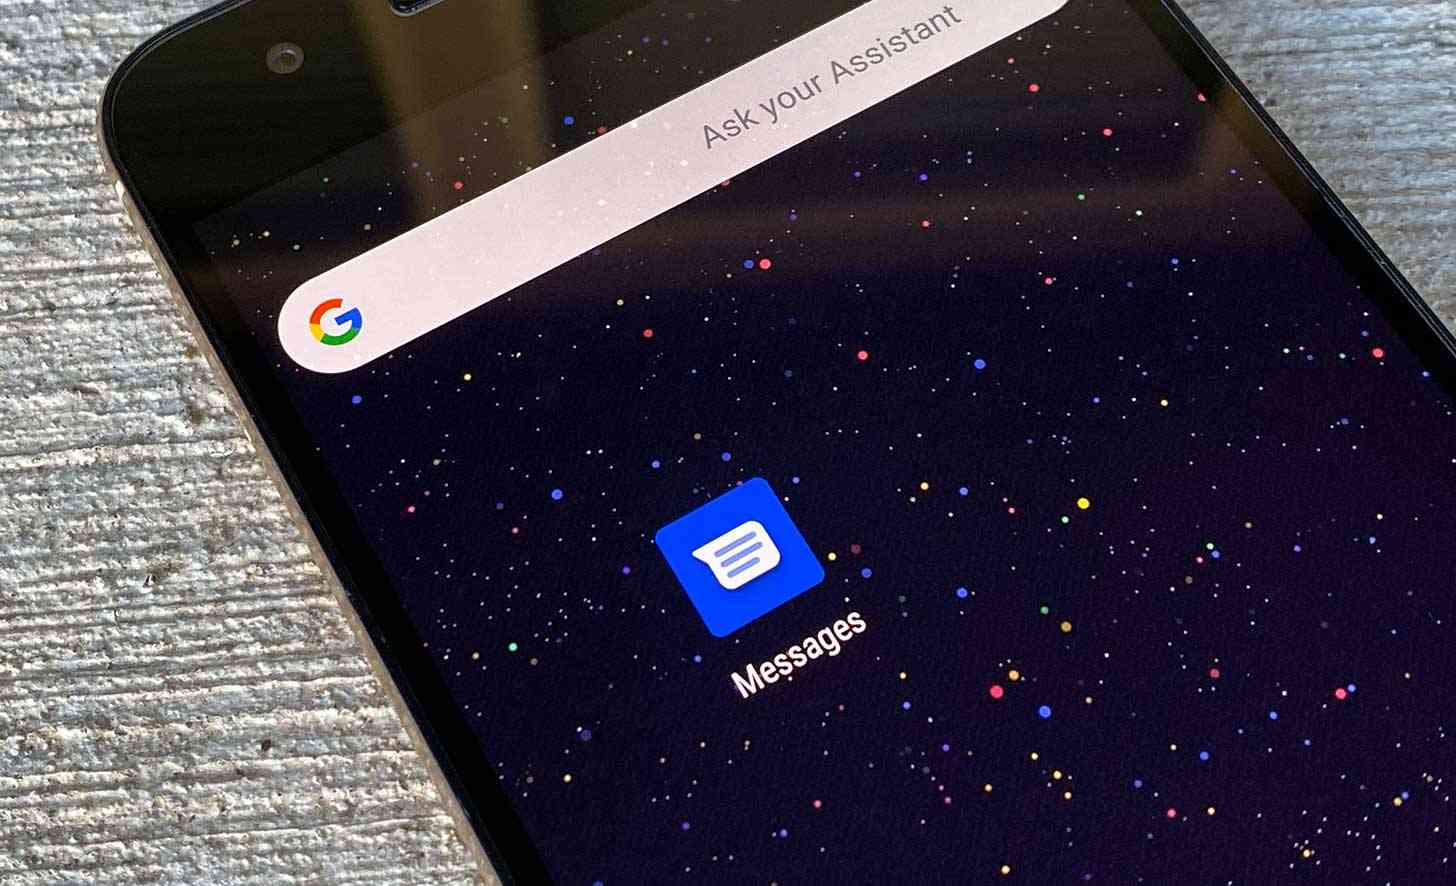 Google Messages app Android